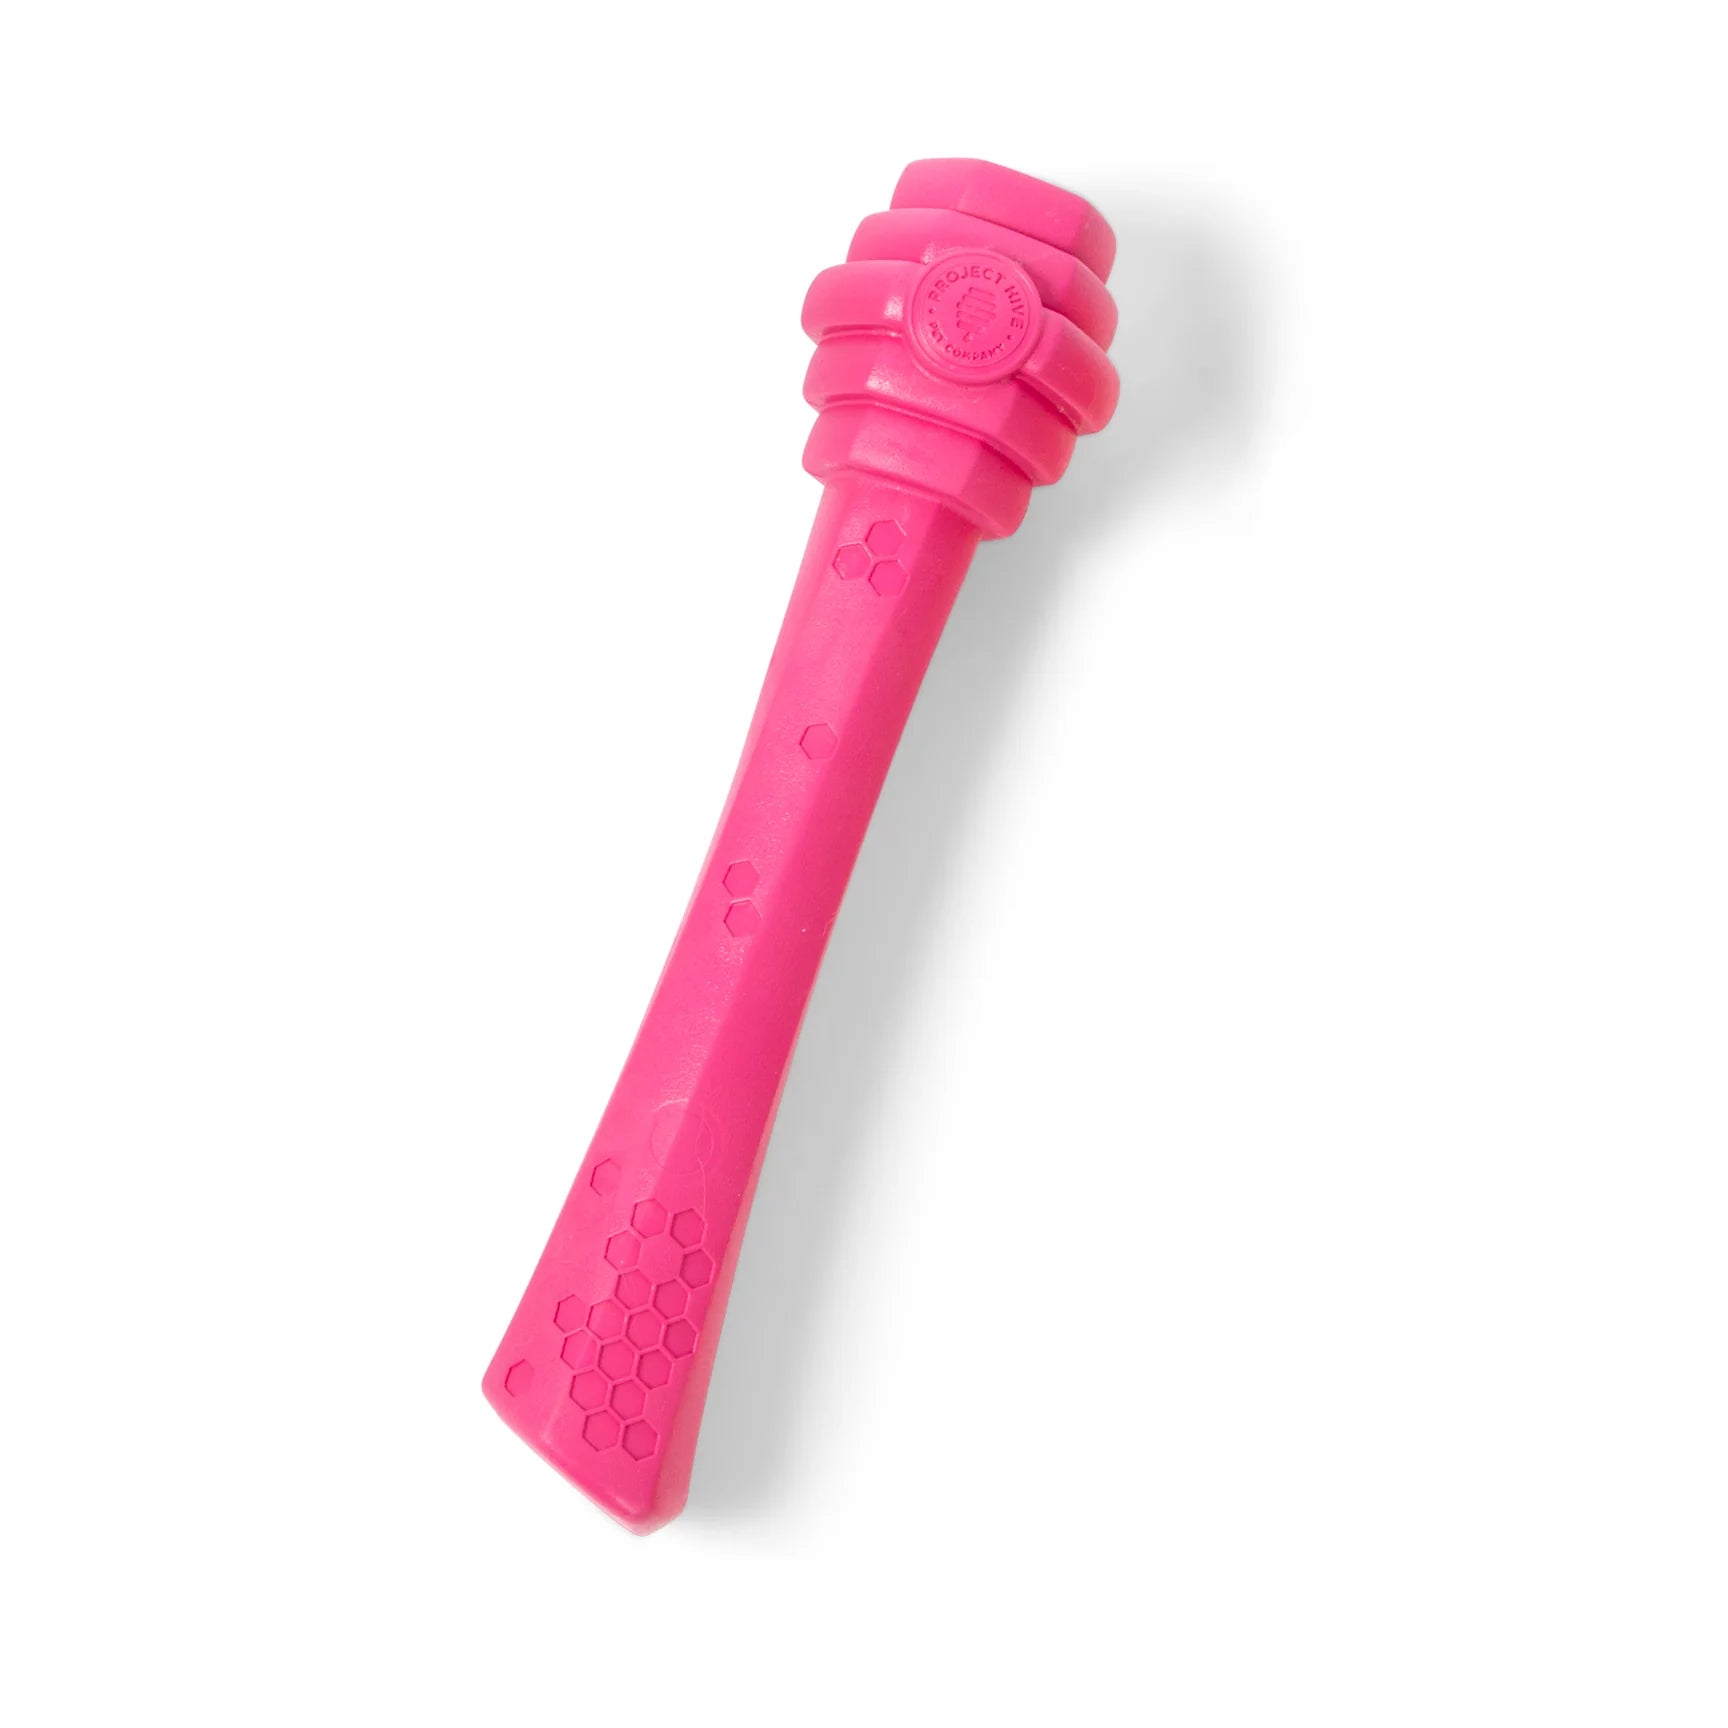 Project Hive Floating Fetch Stick - Wild Berry Scent